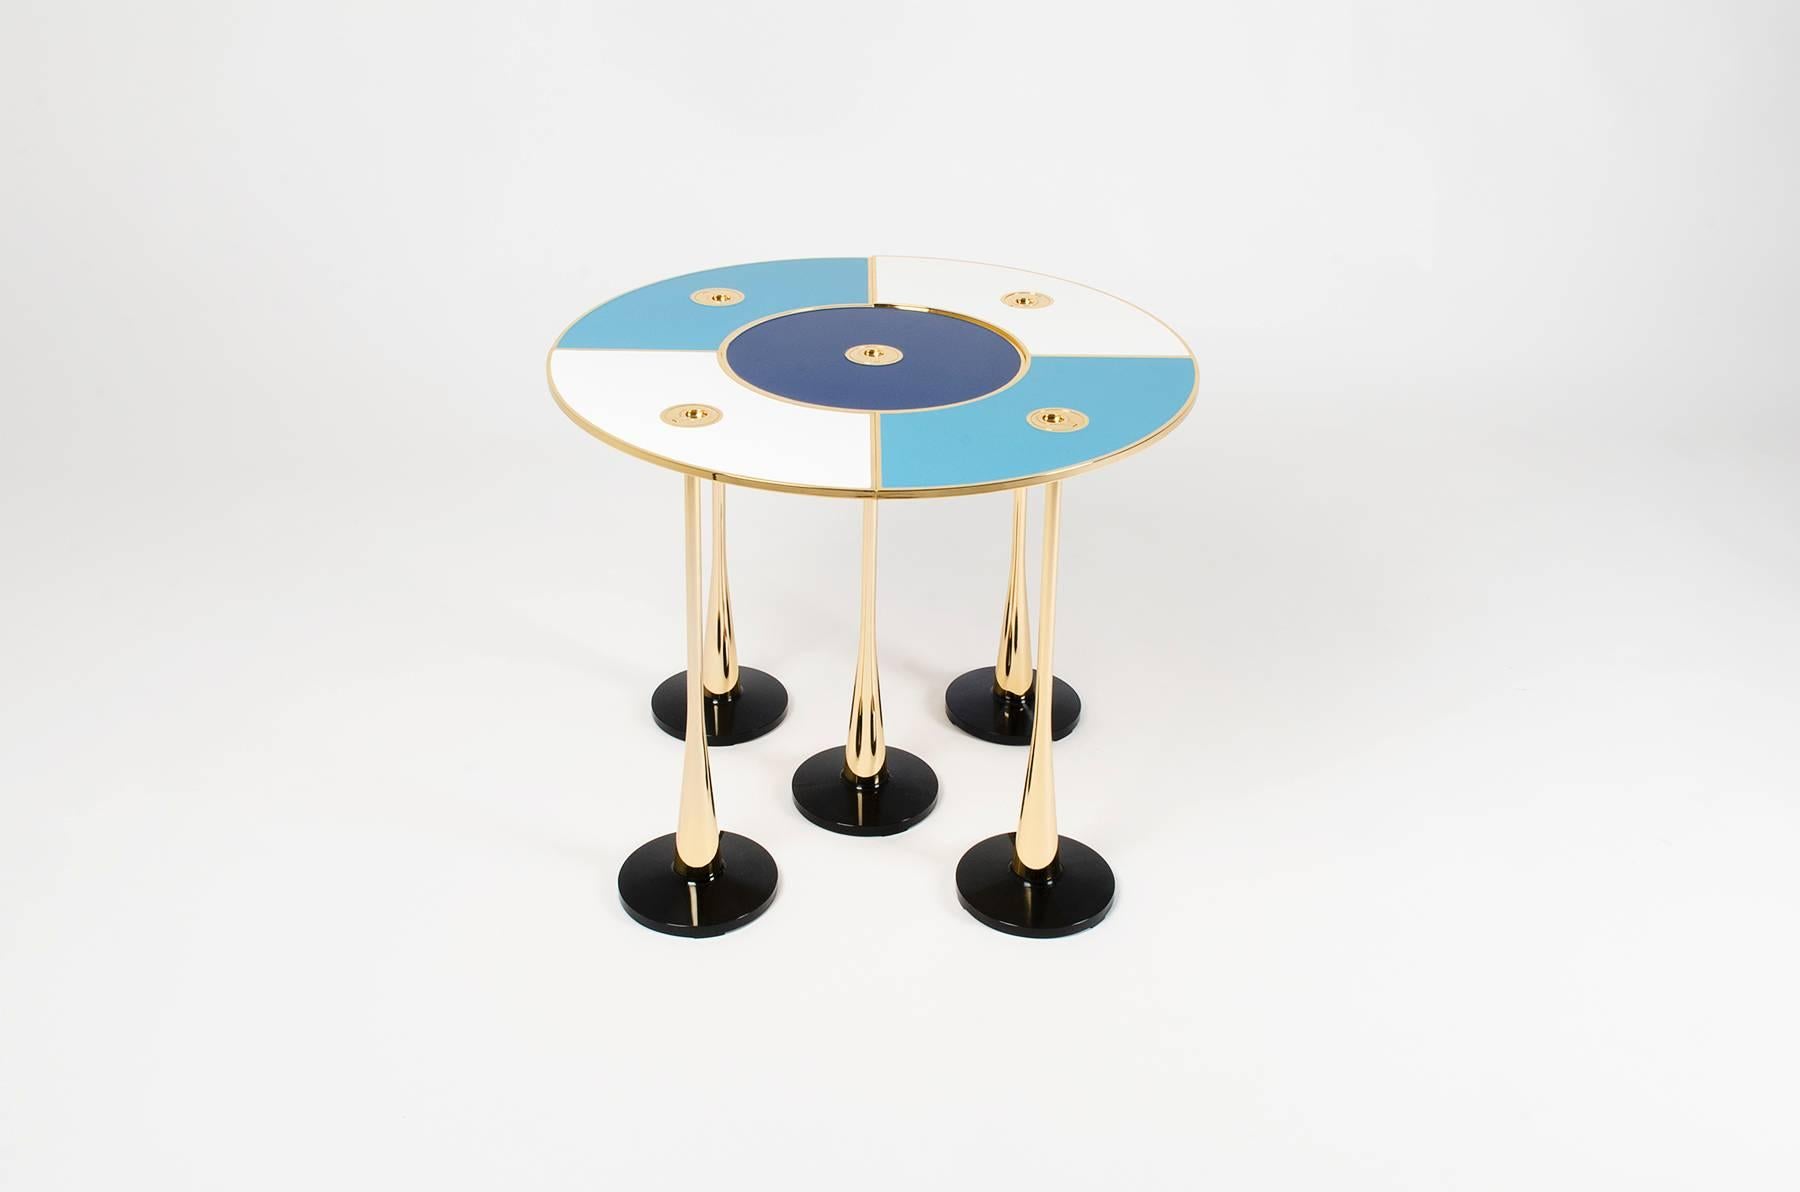 Created to respond to the practical concept of portability, the Perspectiva tables, designed by Fedele Papagni and manufactured by Fragile Edizioni, incorporate a foldaway hook, which means they can be easily lifted and moved. They might be